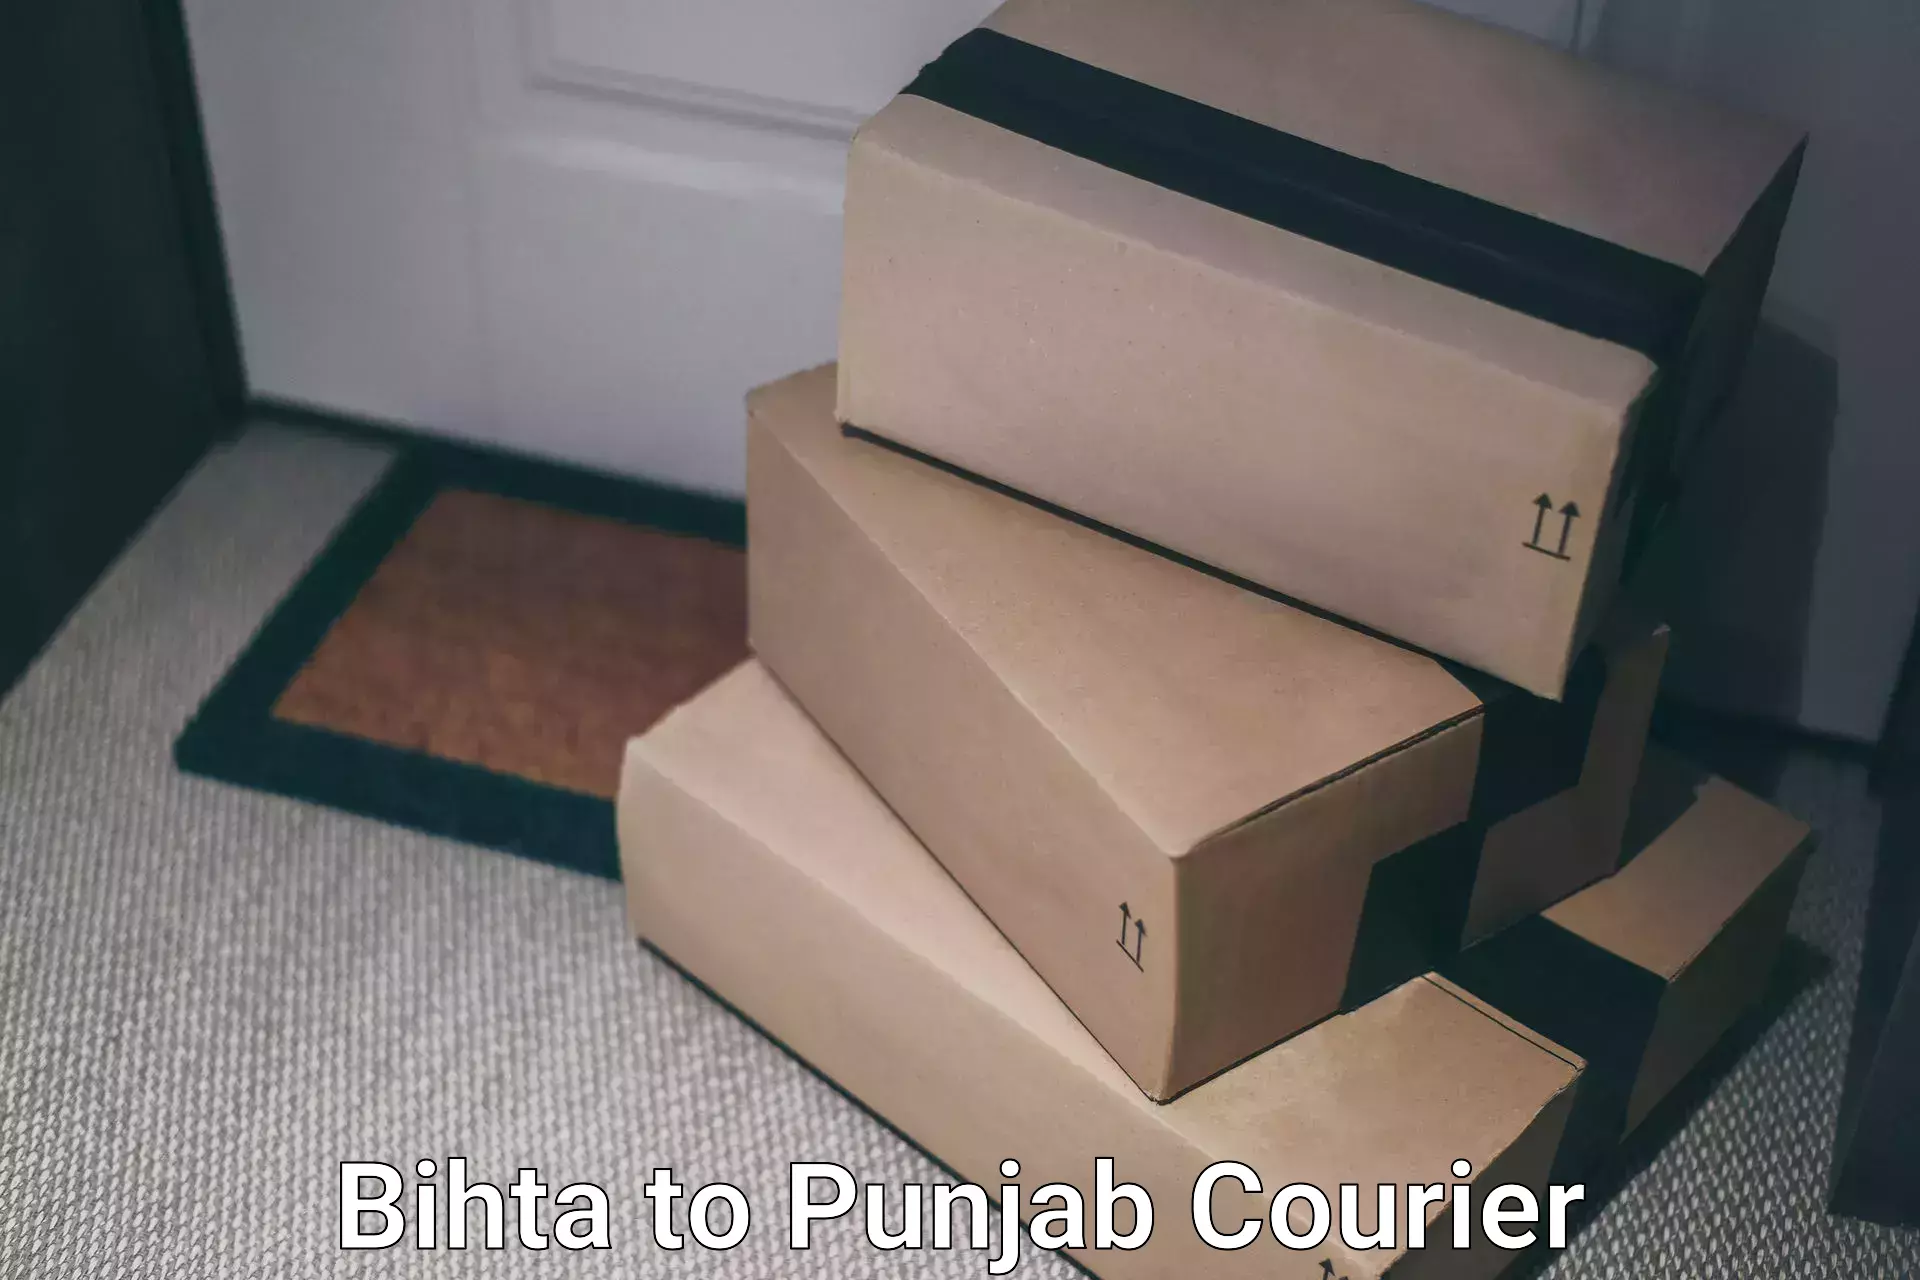 Express courier facilities Bihta to Sultanpur Lodhi